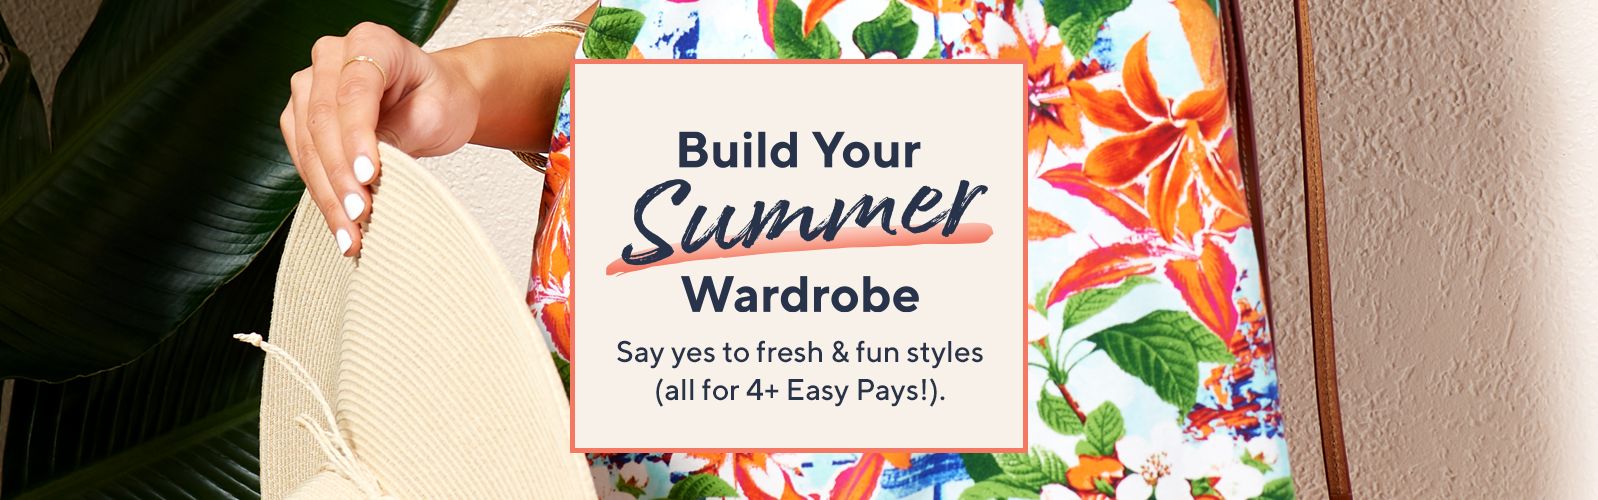 Build Your Summer Wardrobe. Say yes to fresh & fun styles (all for 4+ Easy Pays!). 